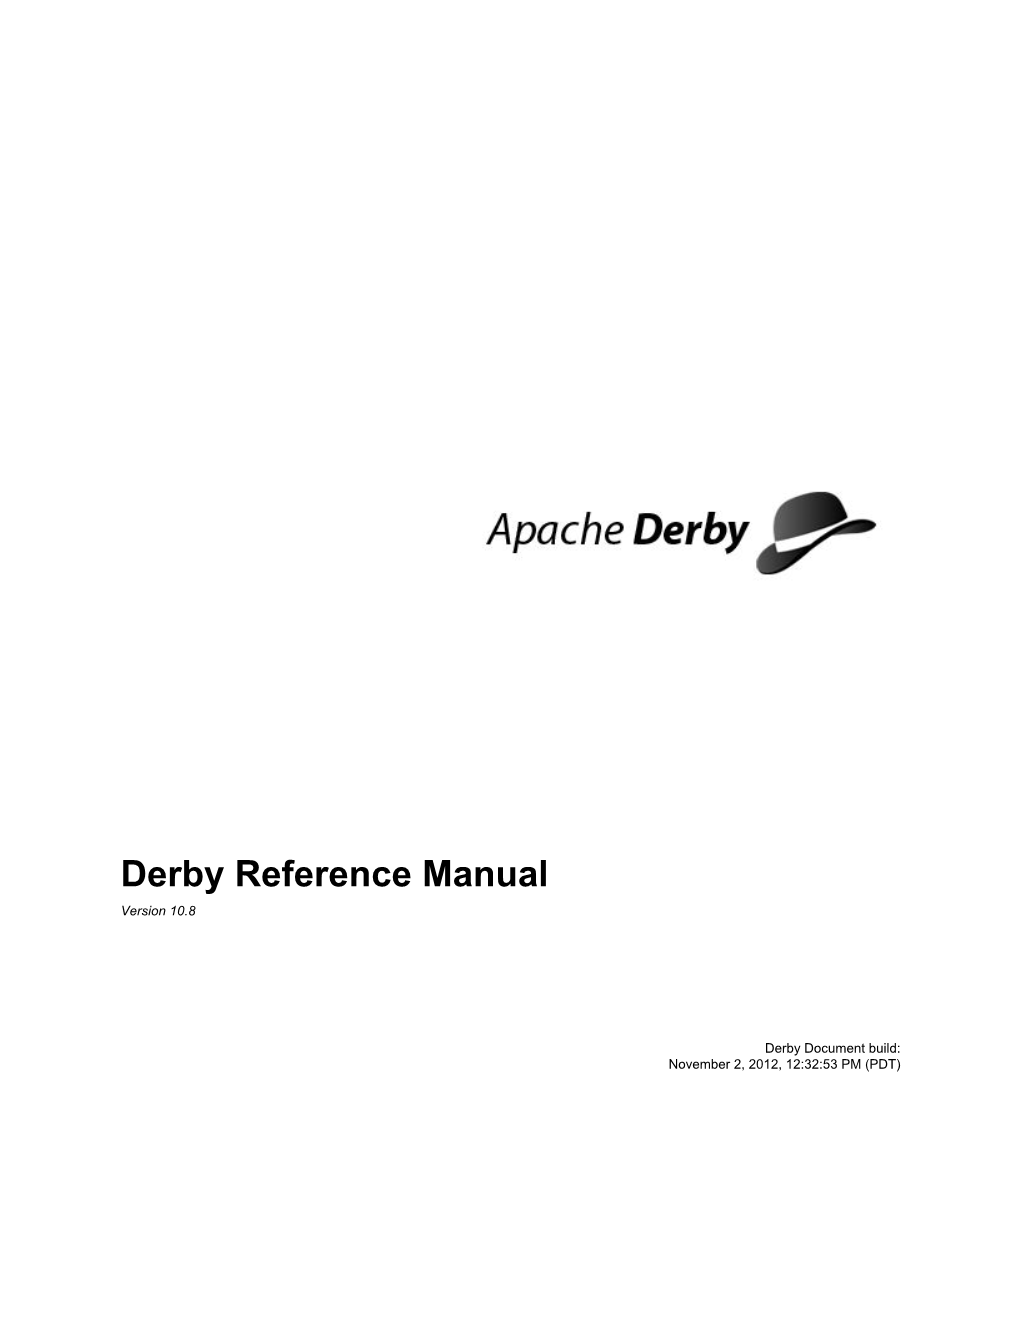 Derby Reference Manual Version 10.8